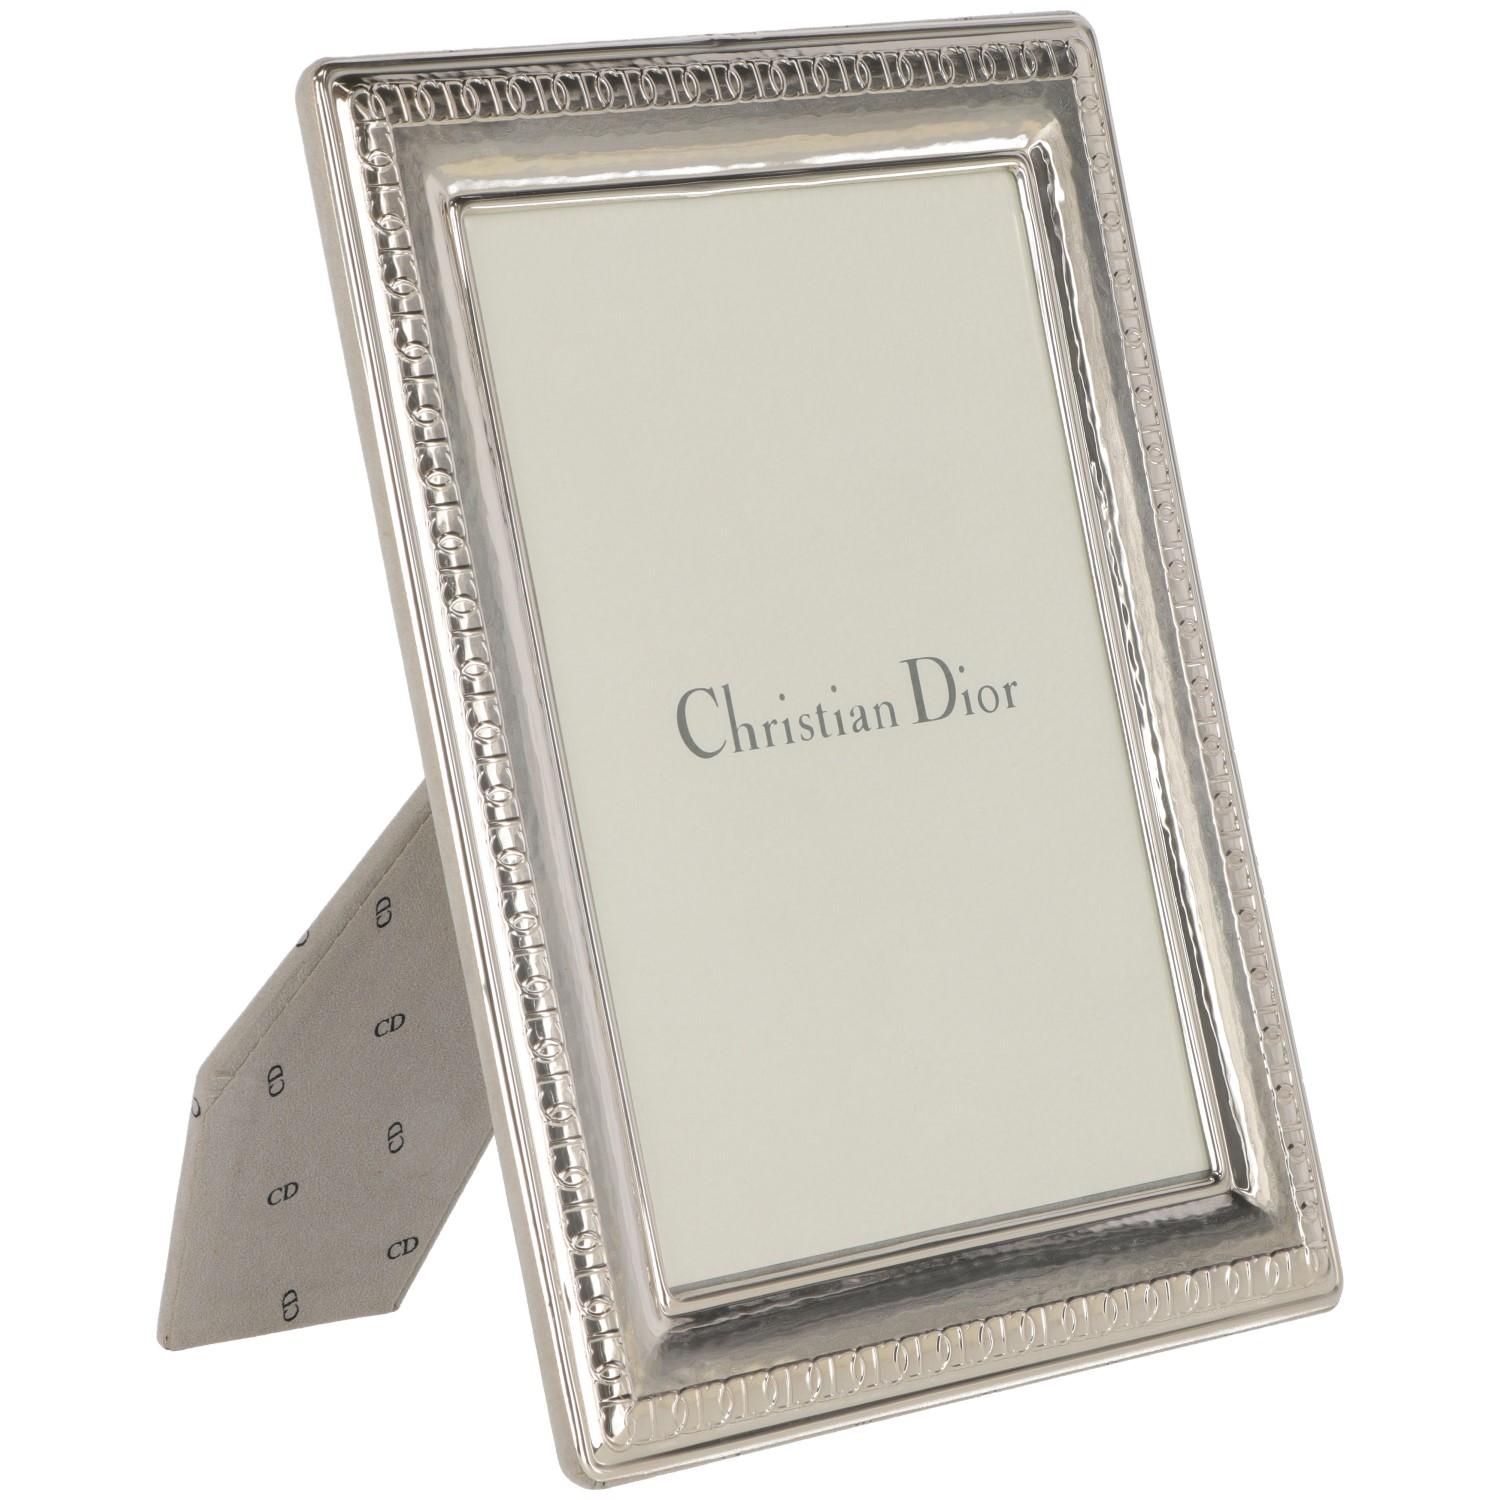 The precious Christian Dior frame is in sterling silver with a protective-tarnish- proof coating guarantee high quality, and lasting splendor. All the frame is branded with CD logo. The original box and the original soft dust -bag is included.
There